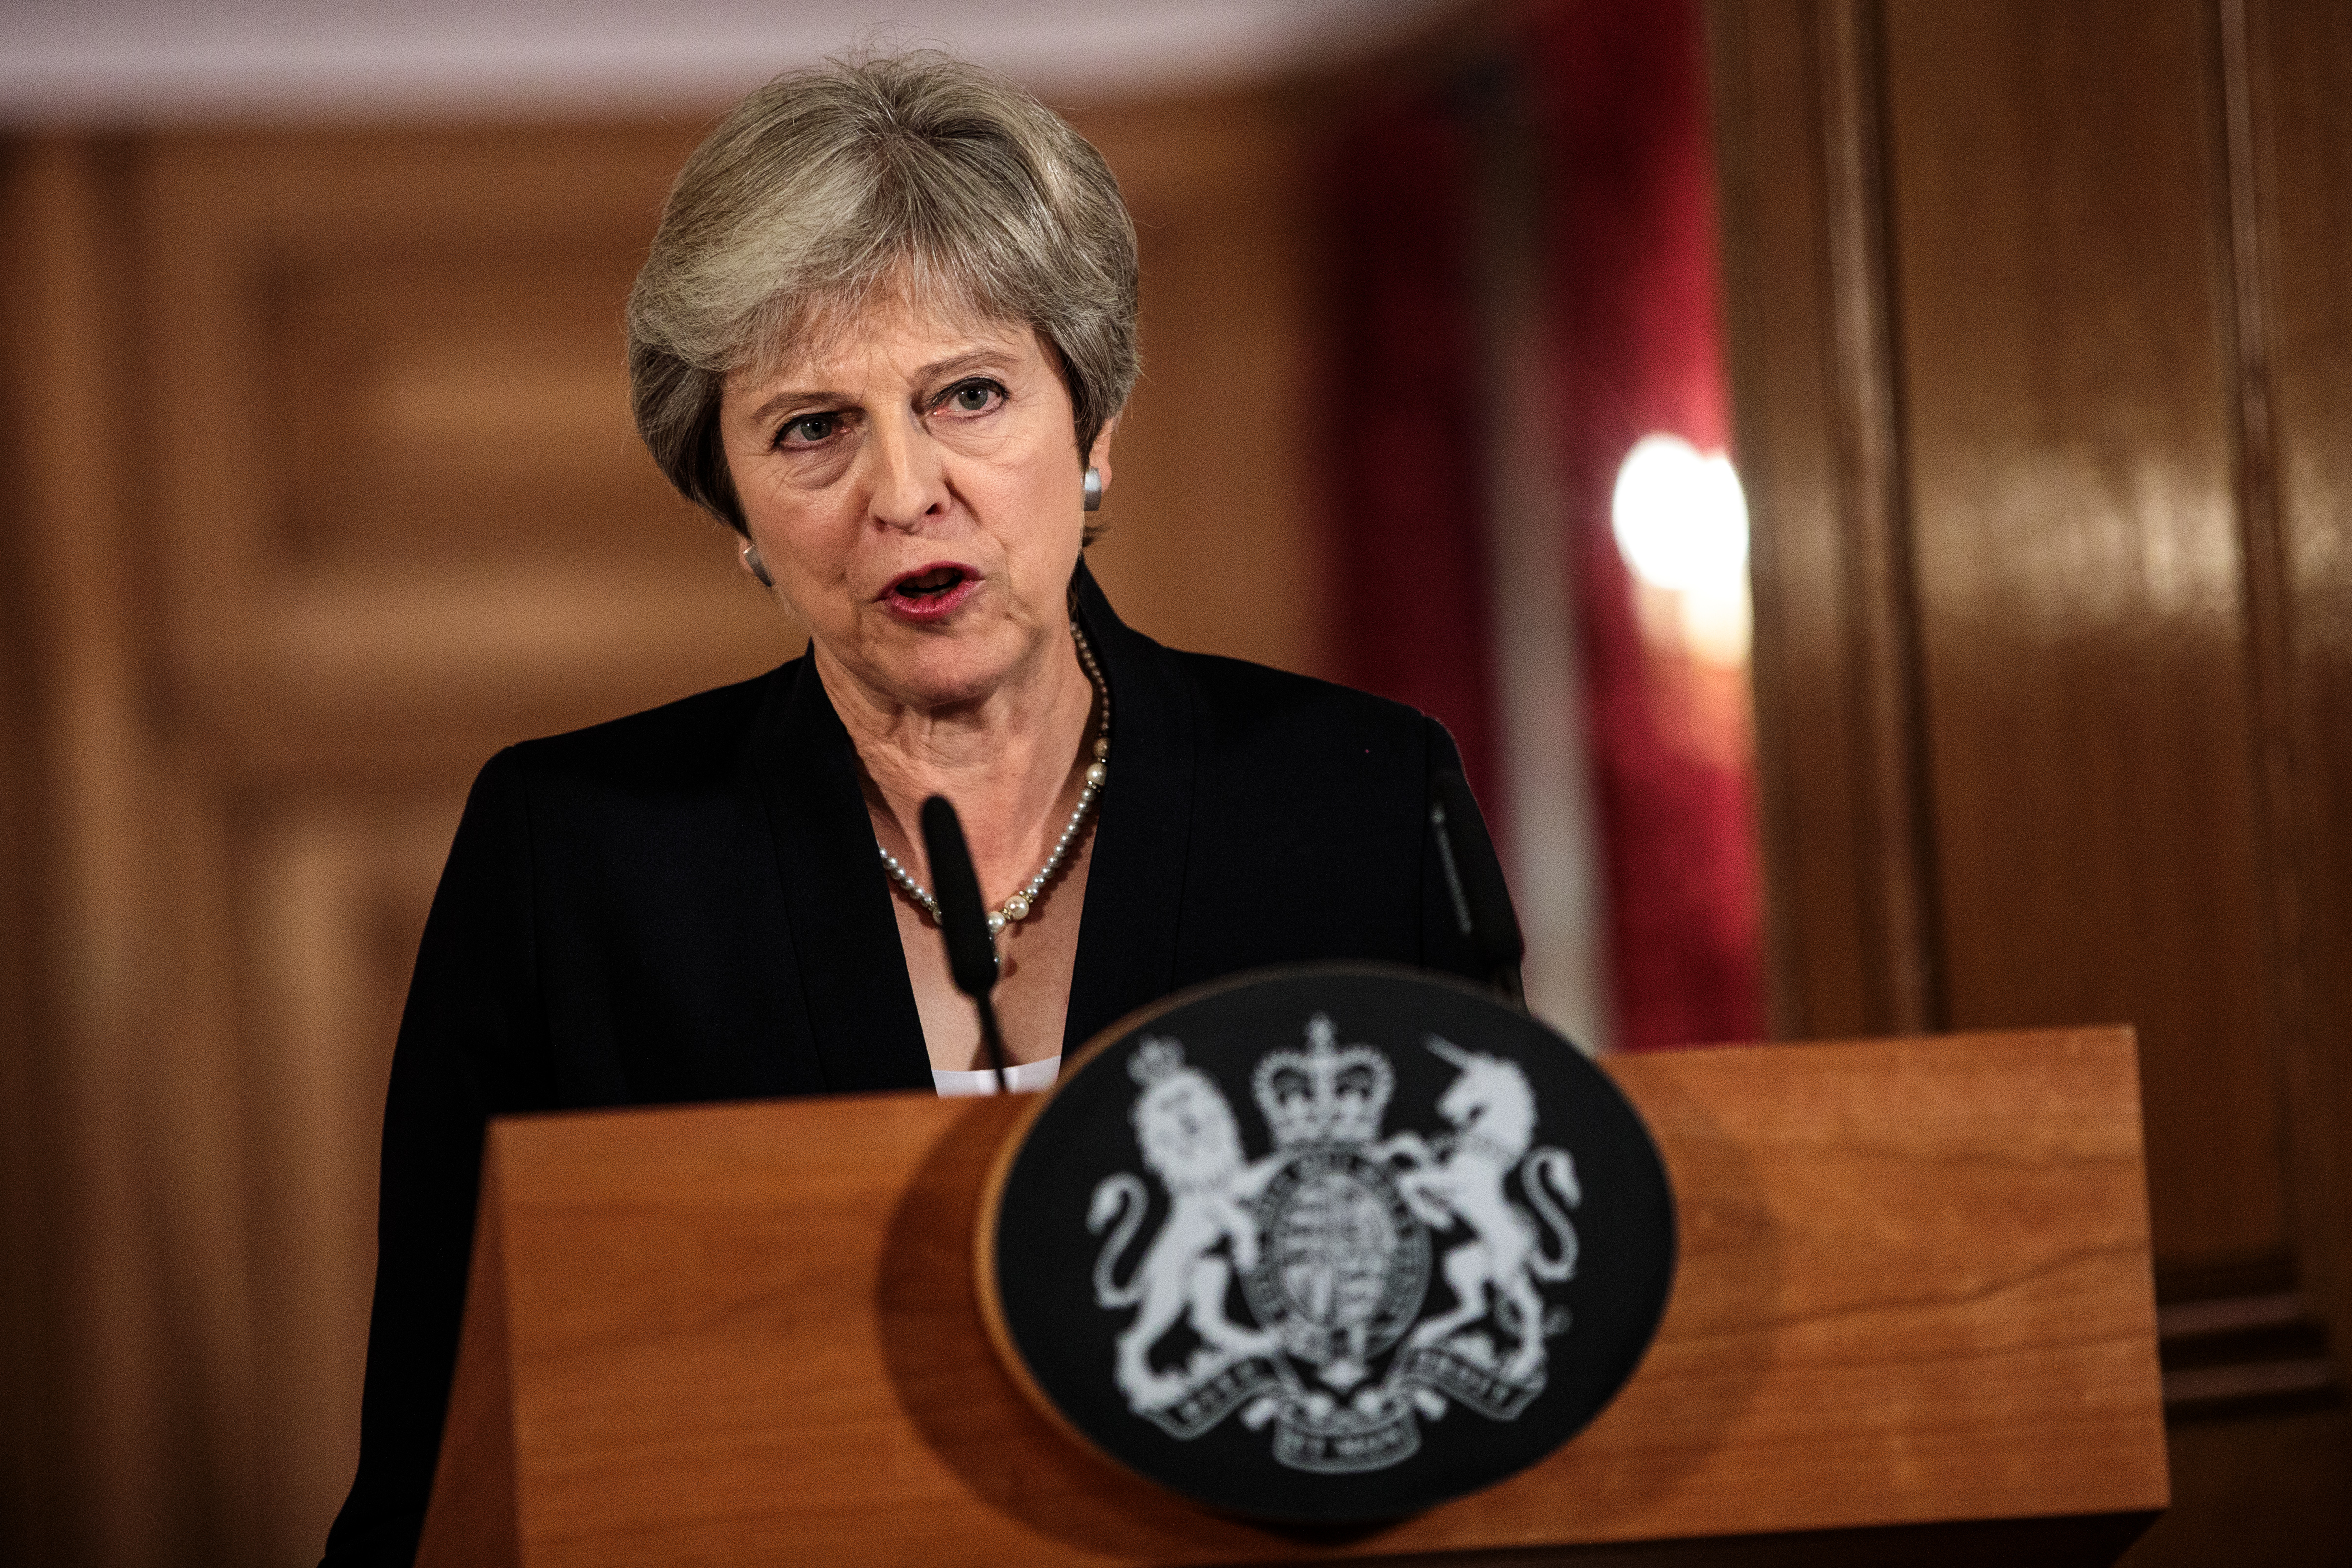 SEPT. 21: British Prime Minister Theresa May makes a statement on Brexit negotiations with the European Union at Number 10 Downing Street. May reiterated that a no-deal Brexit is better than a bad deal in a speech to the British people after the EU rejected her Chequers Plan for leaving the European Union. (Jack Taylor&mdash;Getty Images)